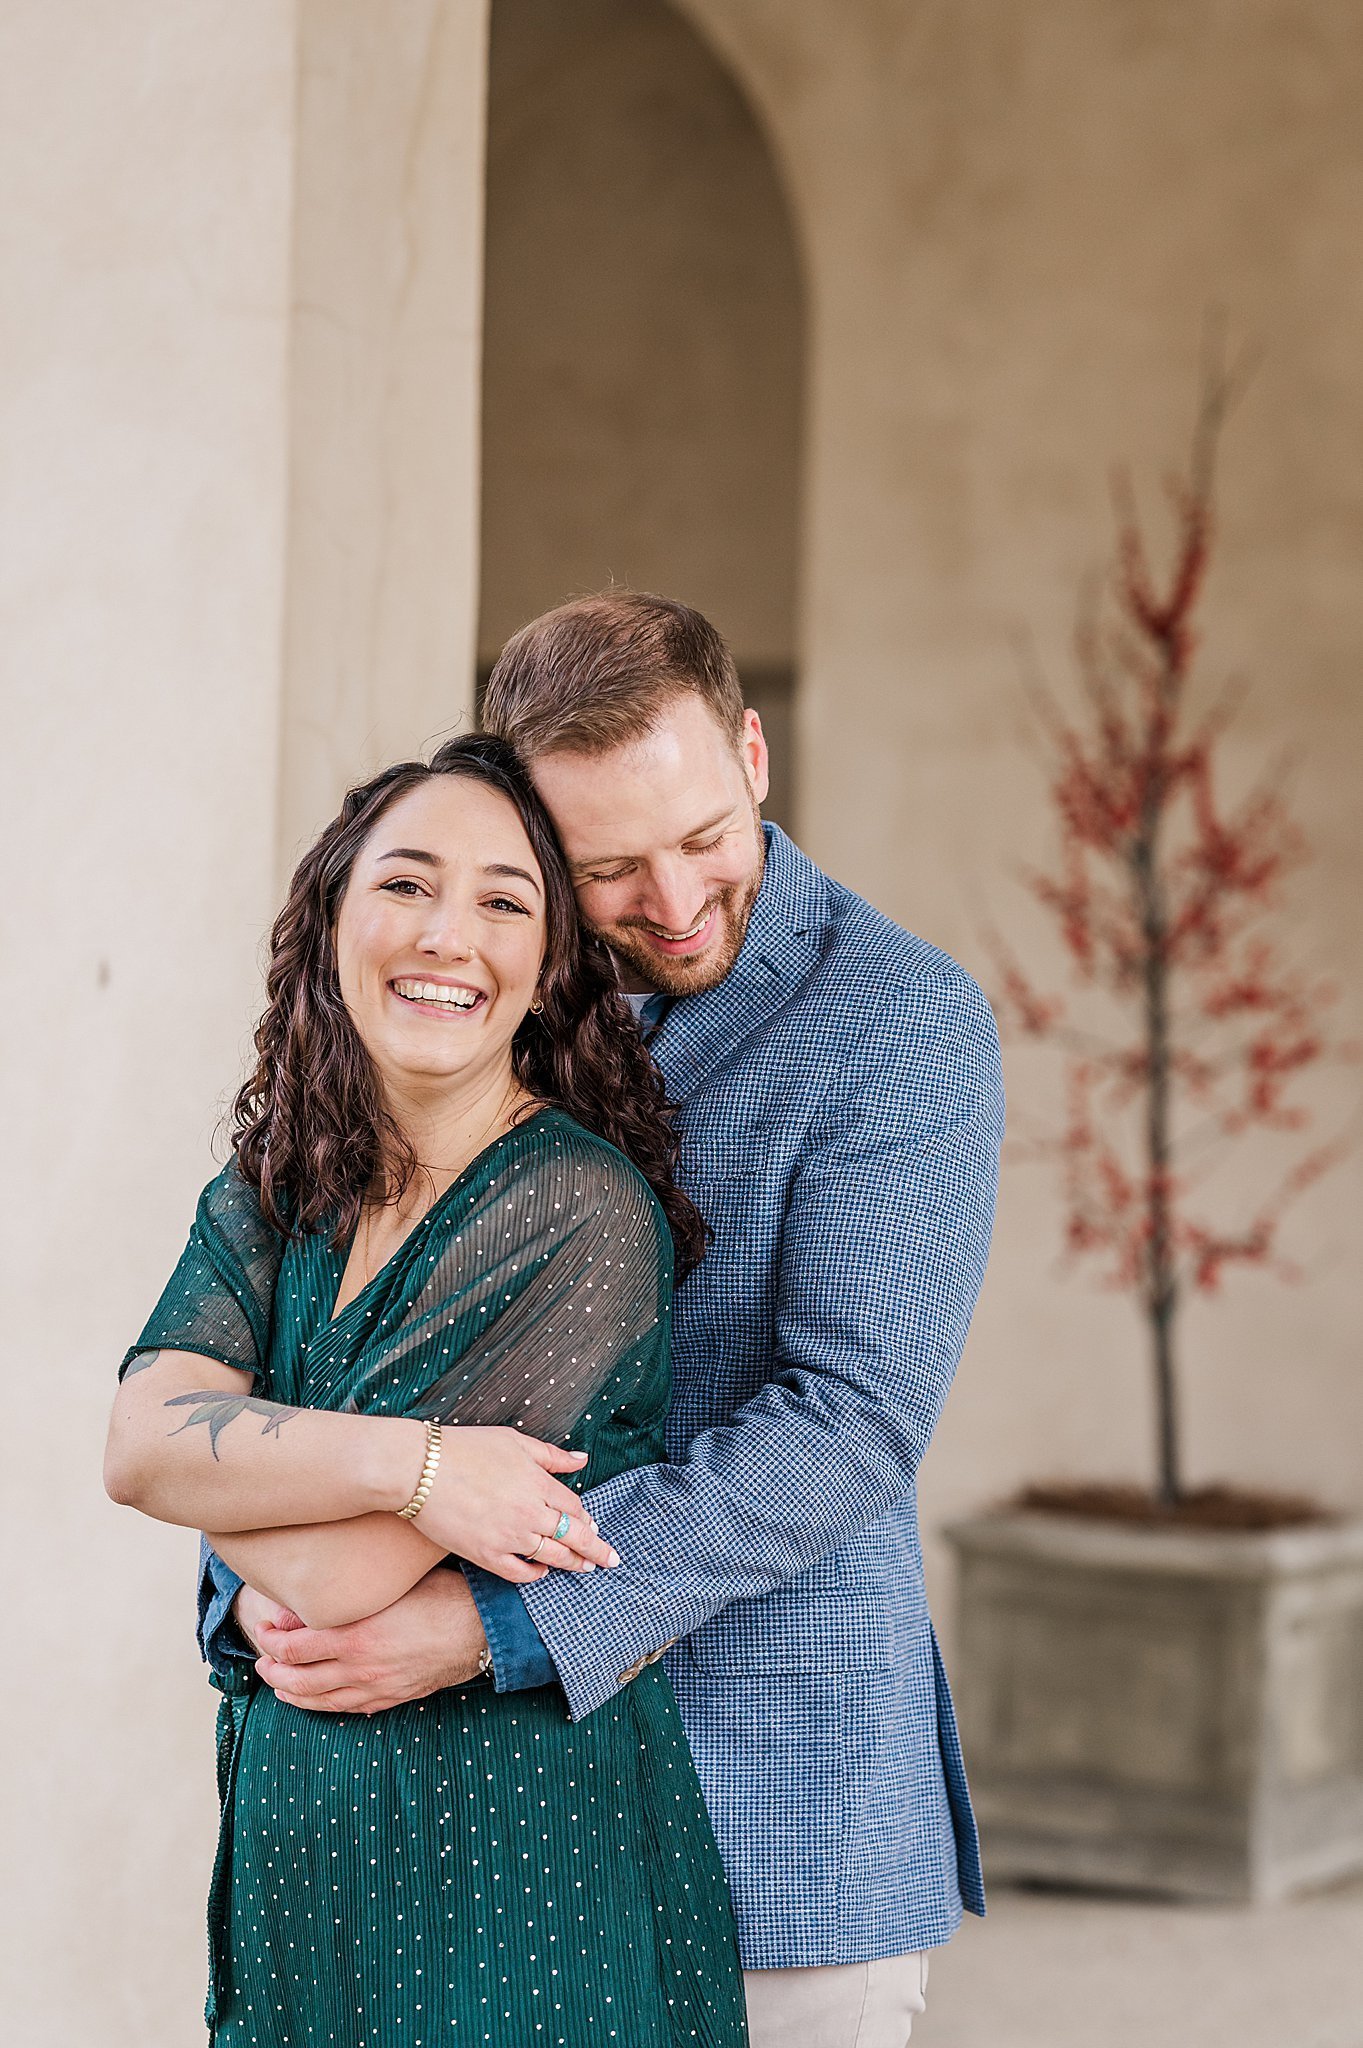 Longwood Gardens Winter Engagement Session Photography Session_4164.jpg